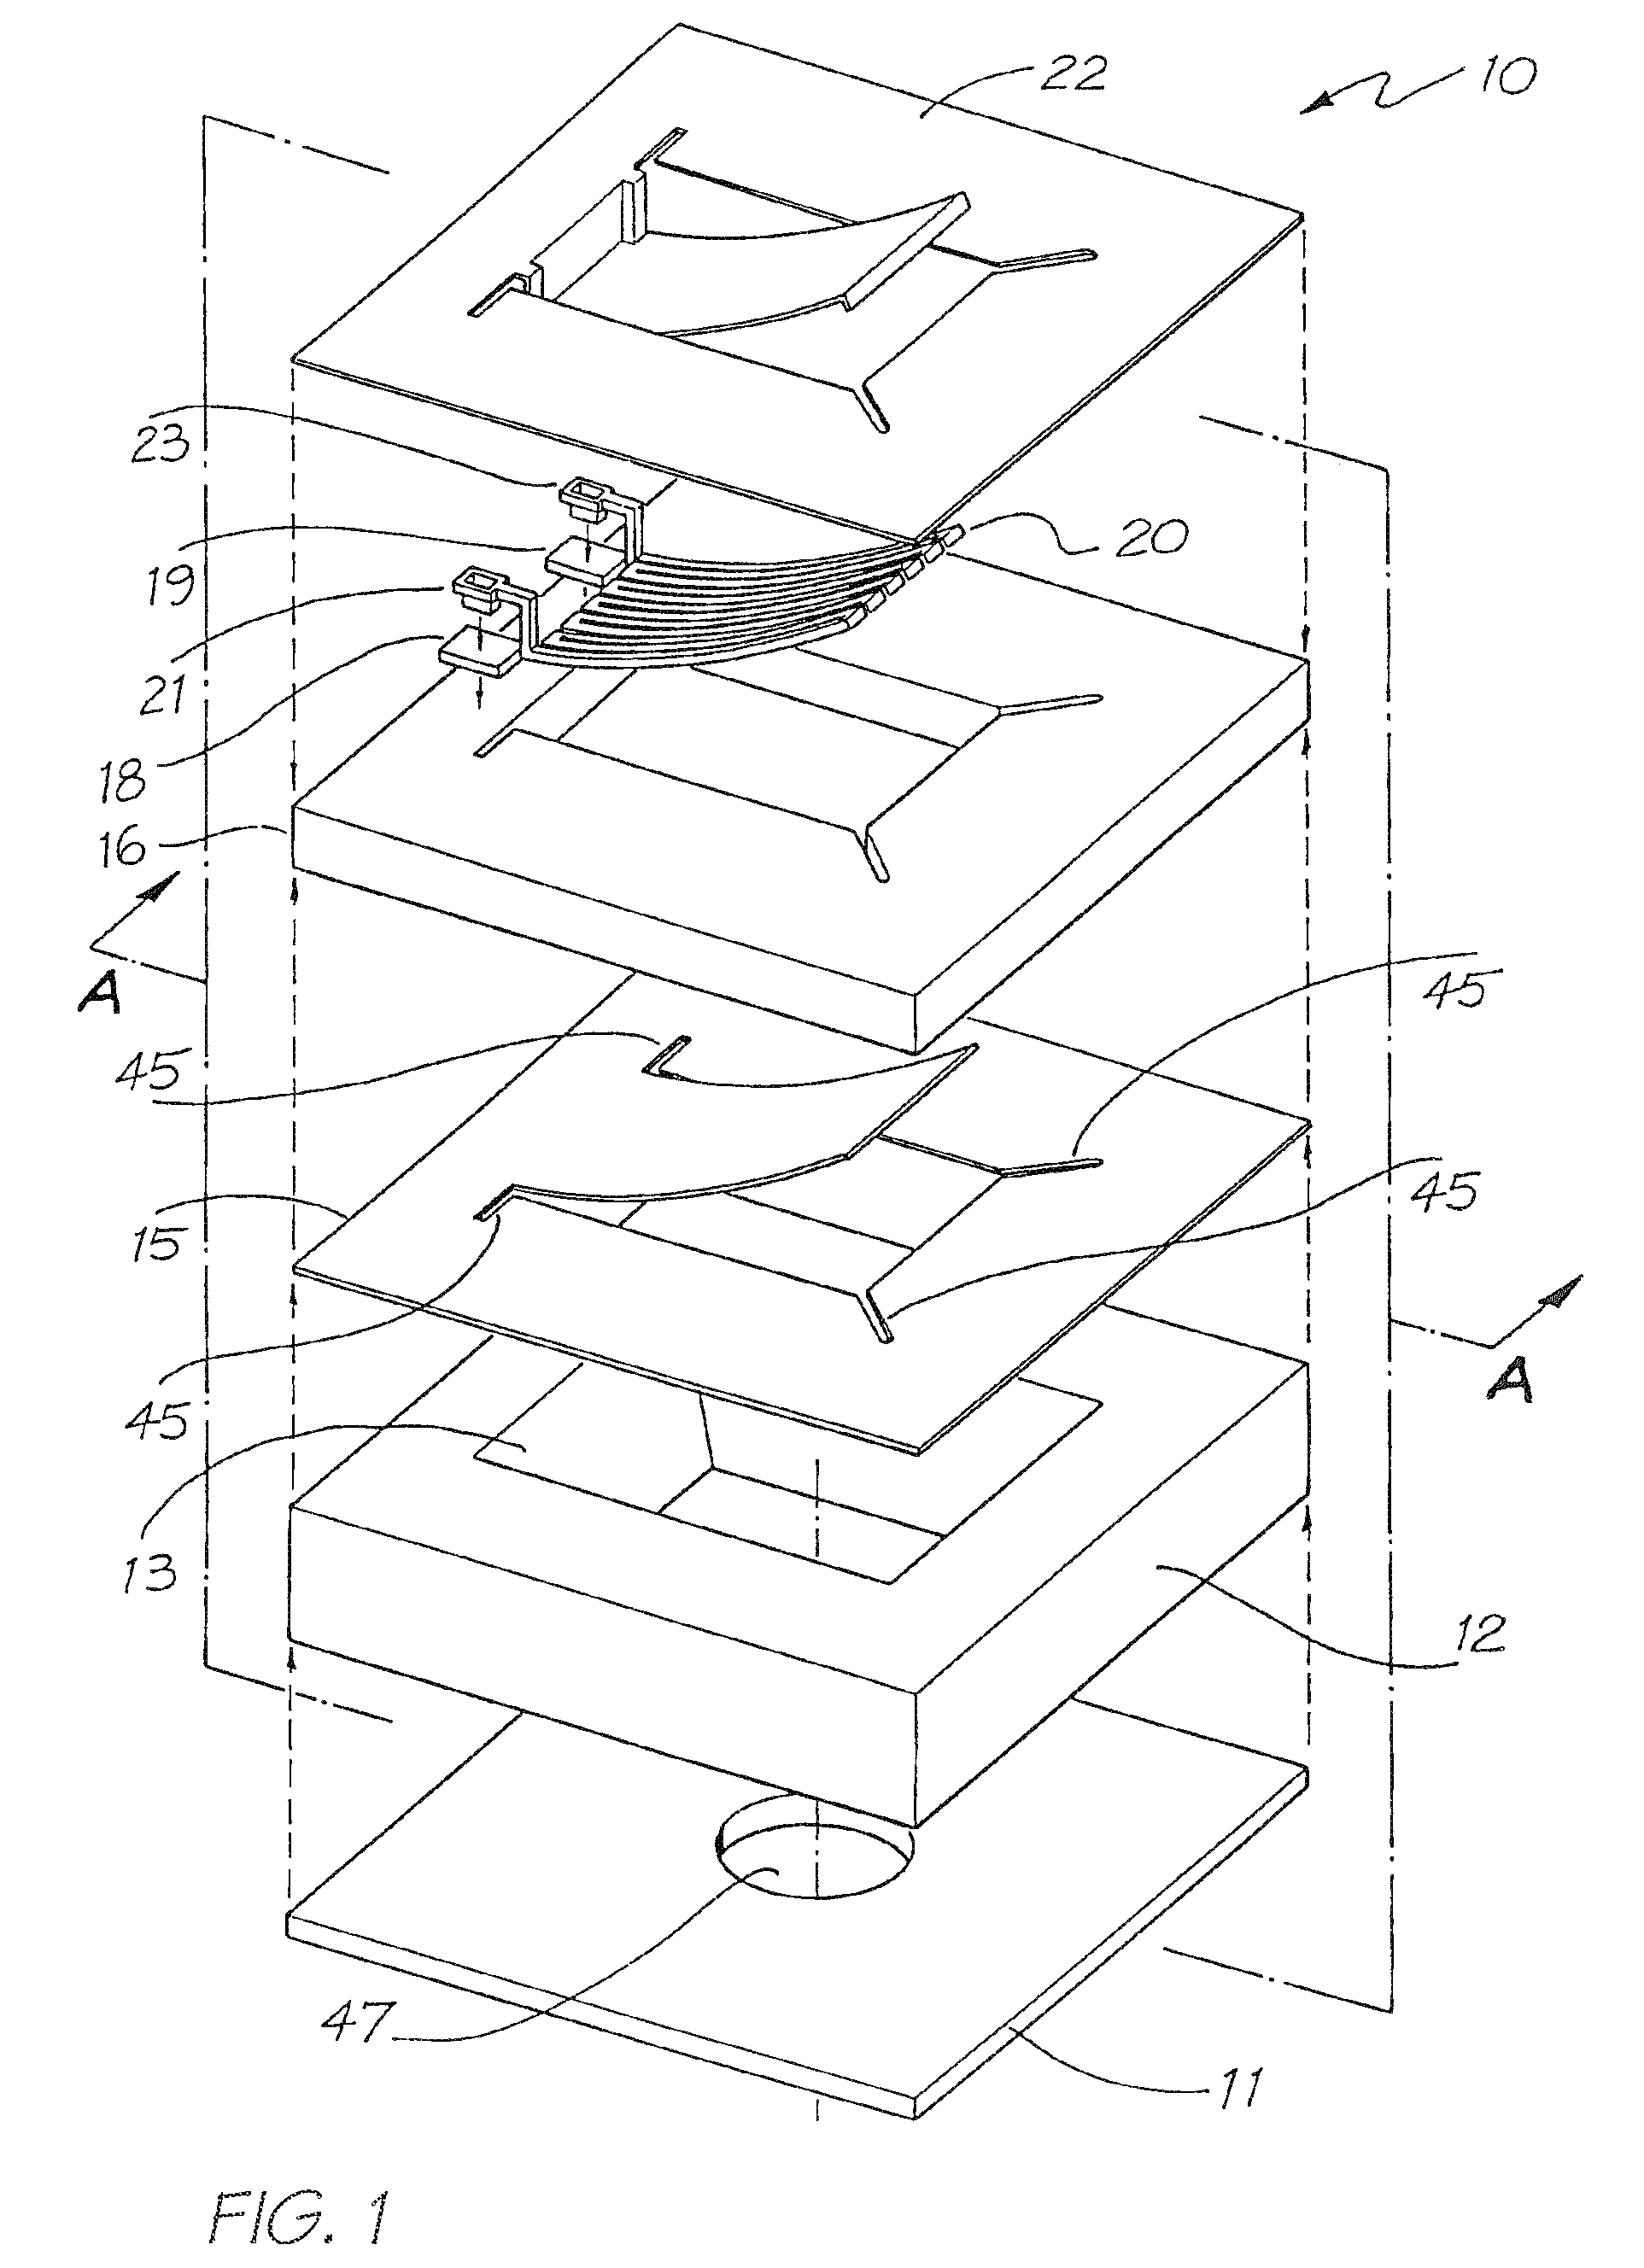 Method Of Forming Printhead By Removing Sacrificial Material Through Nozzle Apertures